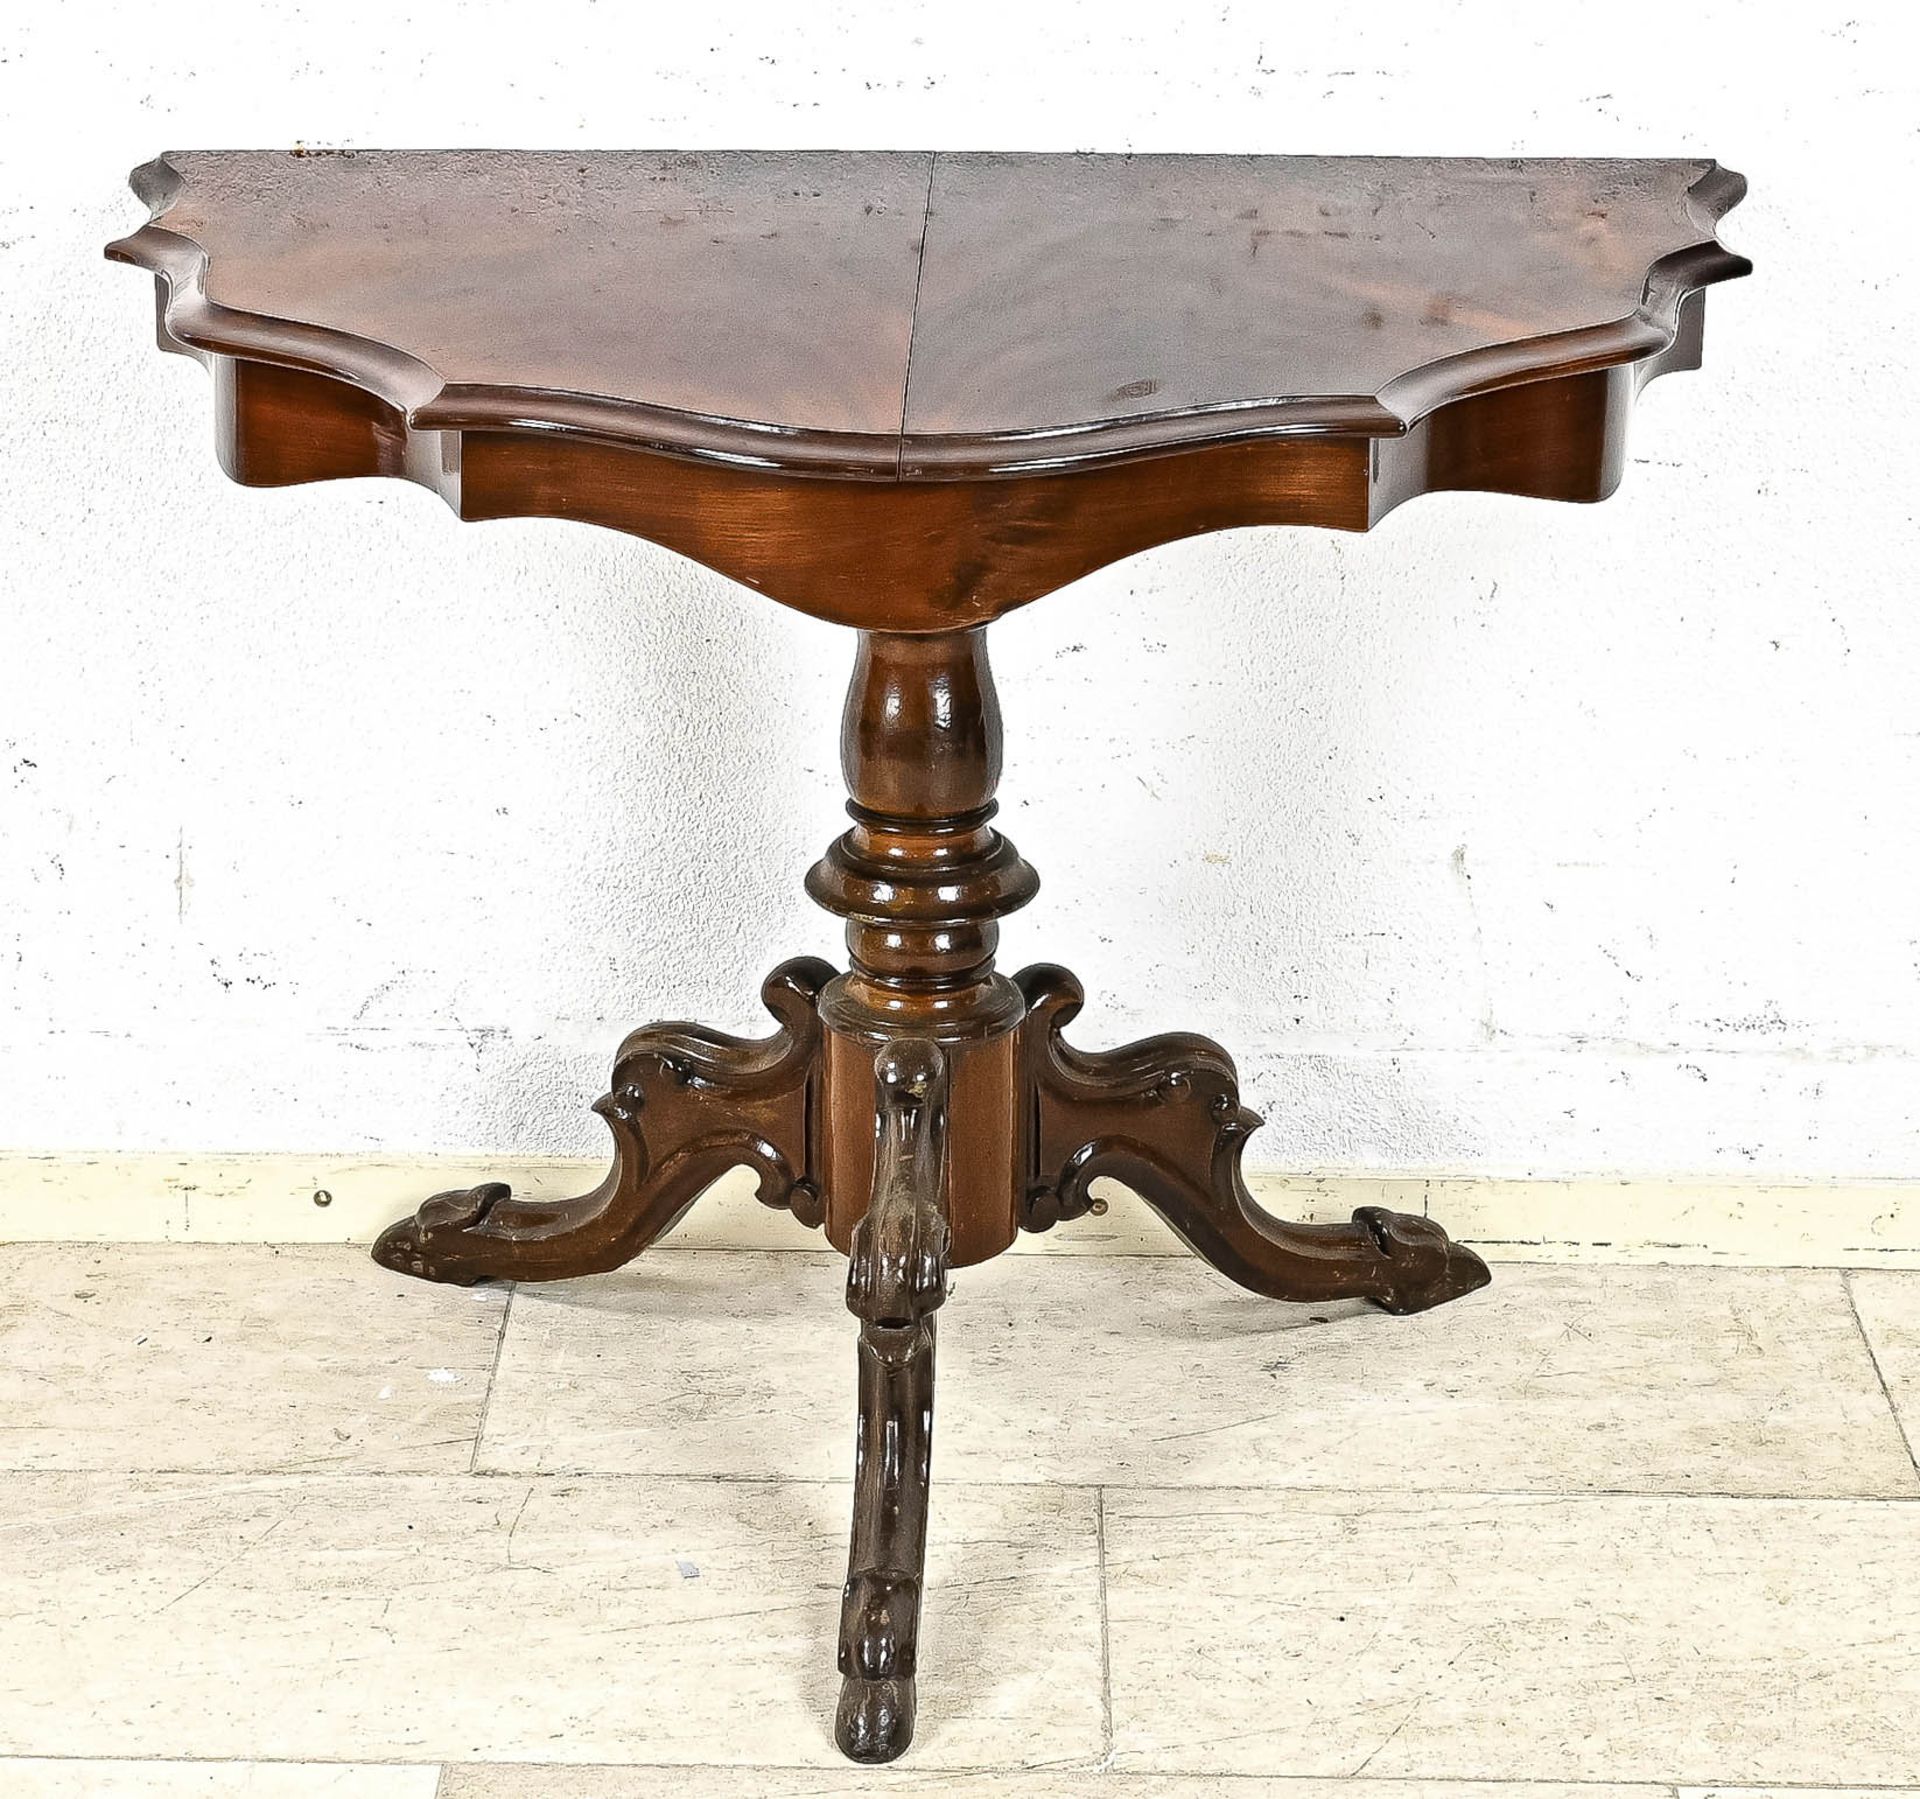 Console table around 1860, solid mahogany, 69 x 90 x 65 cm -The furniture cannot be viewed in our